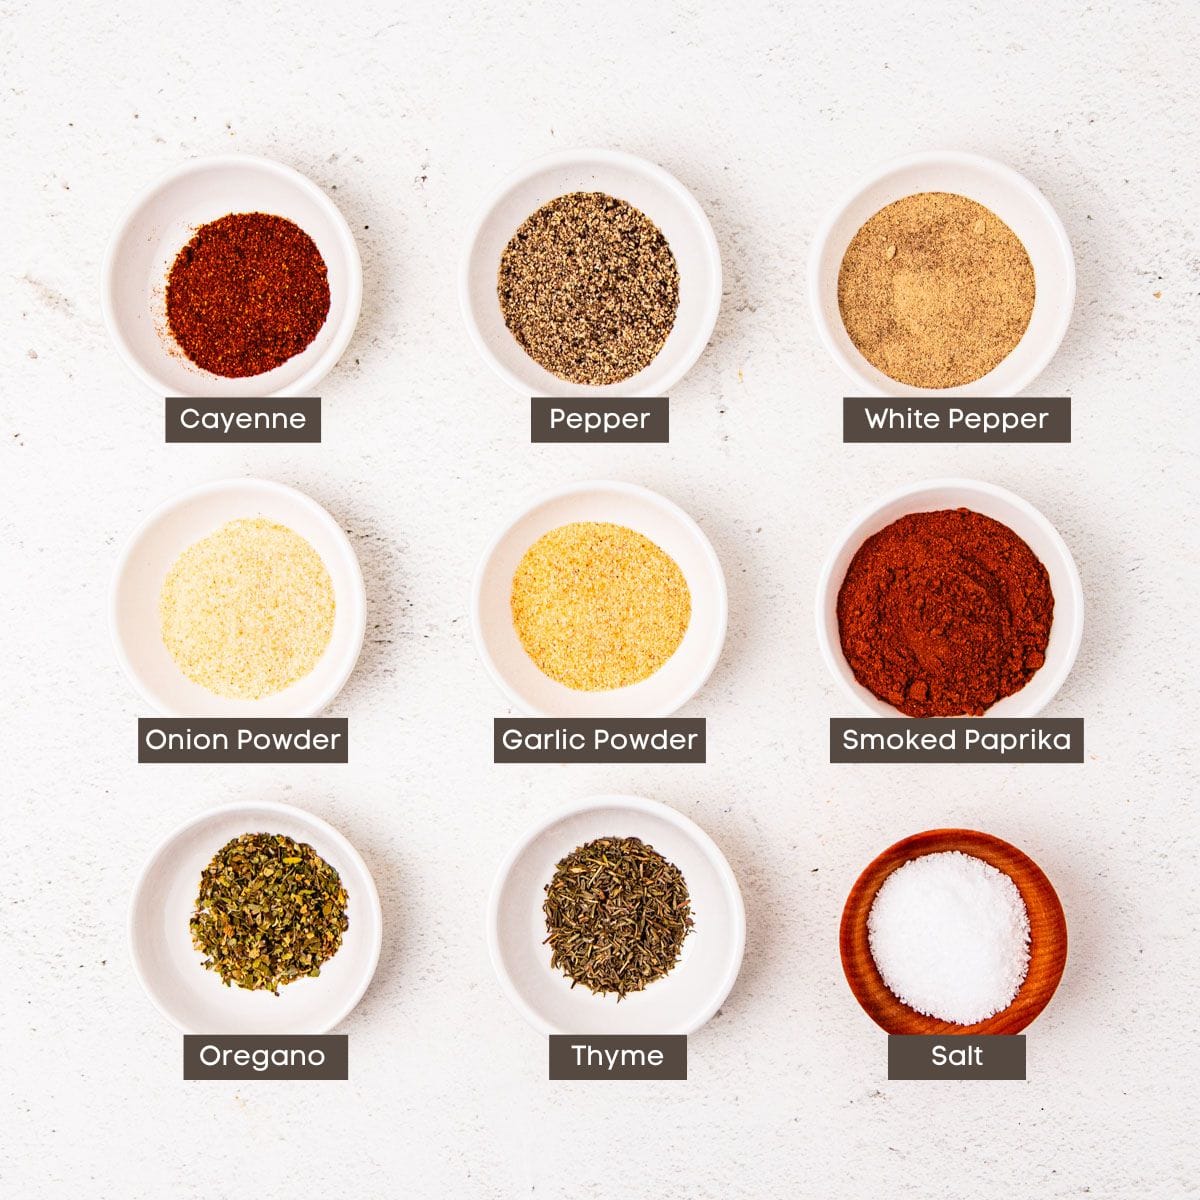 Ingredients for Creole seasoning in individual bowls on a countertop.